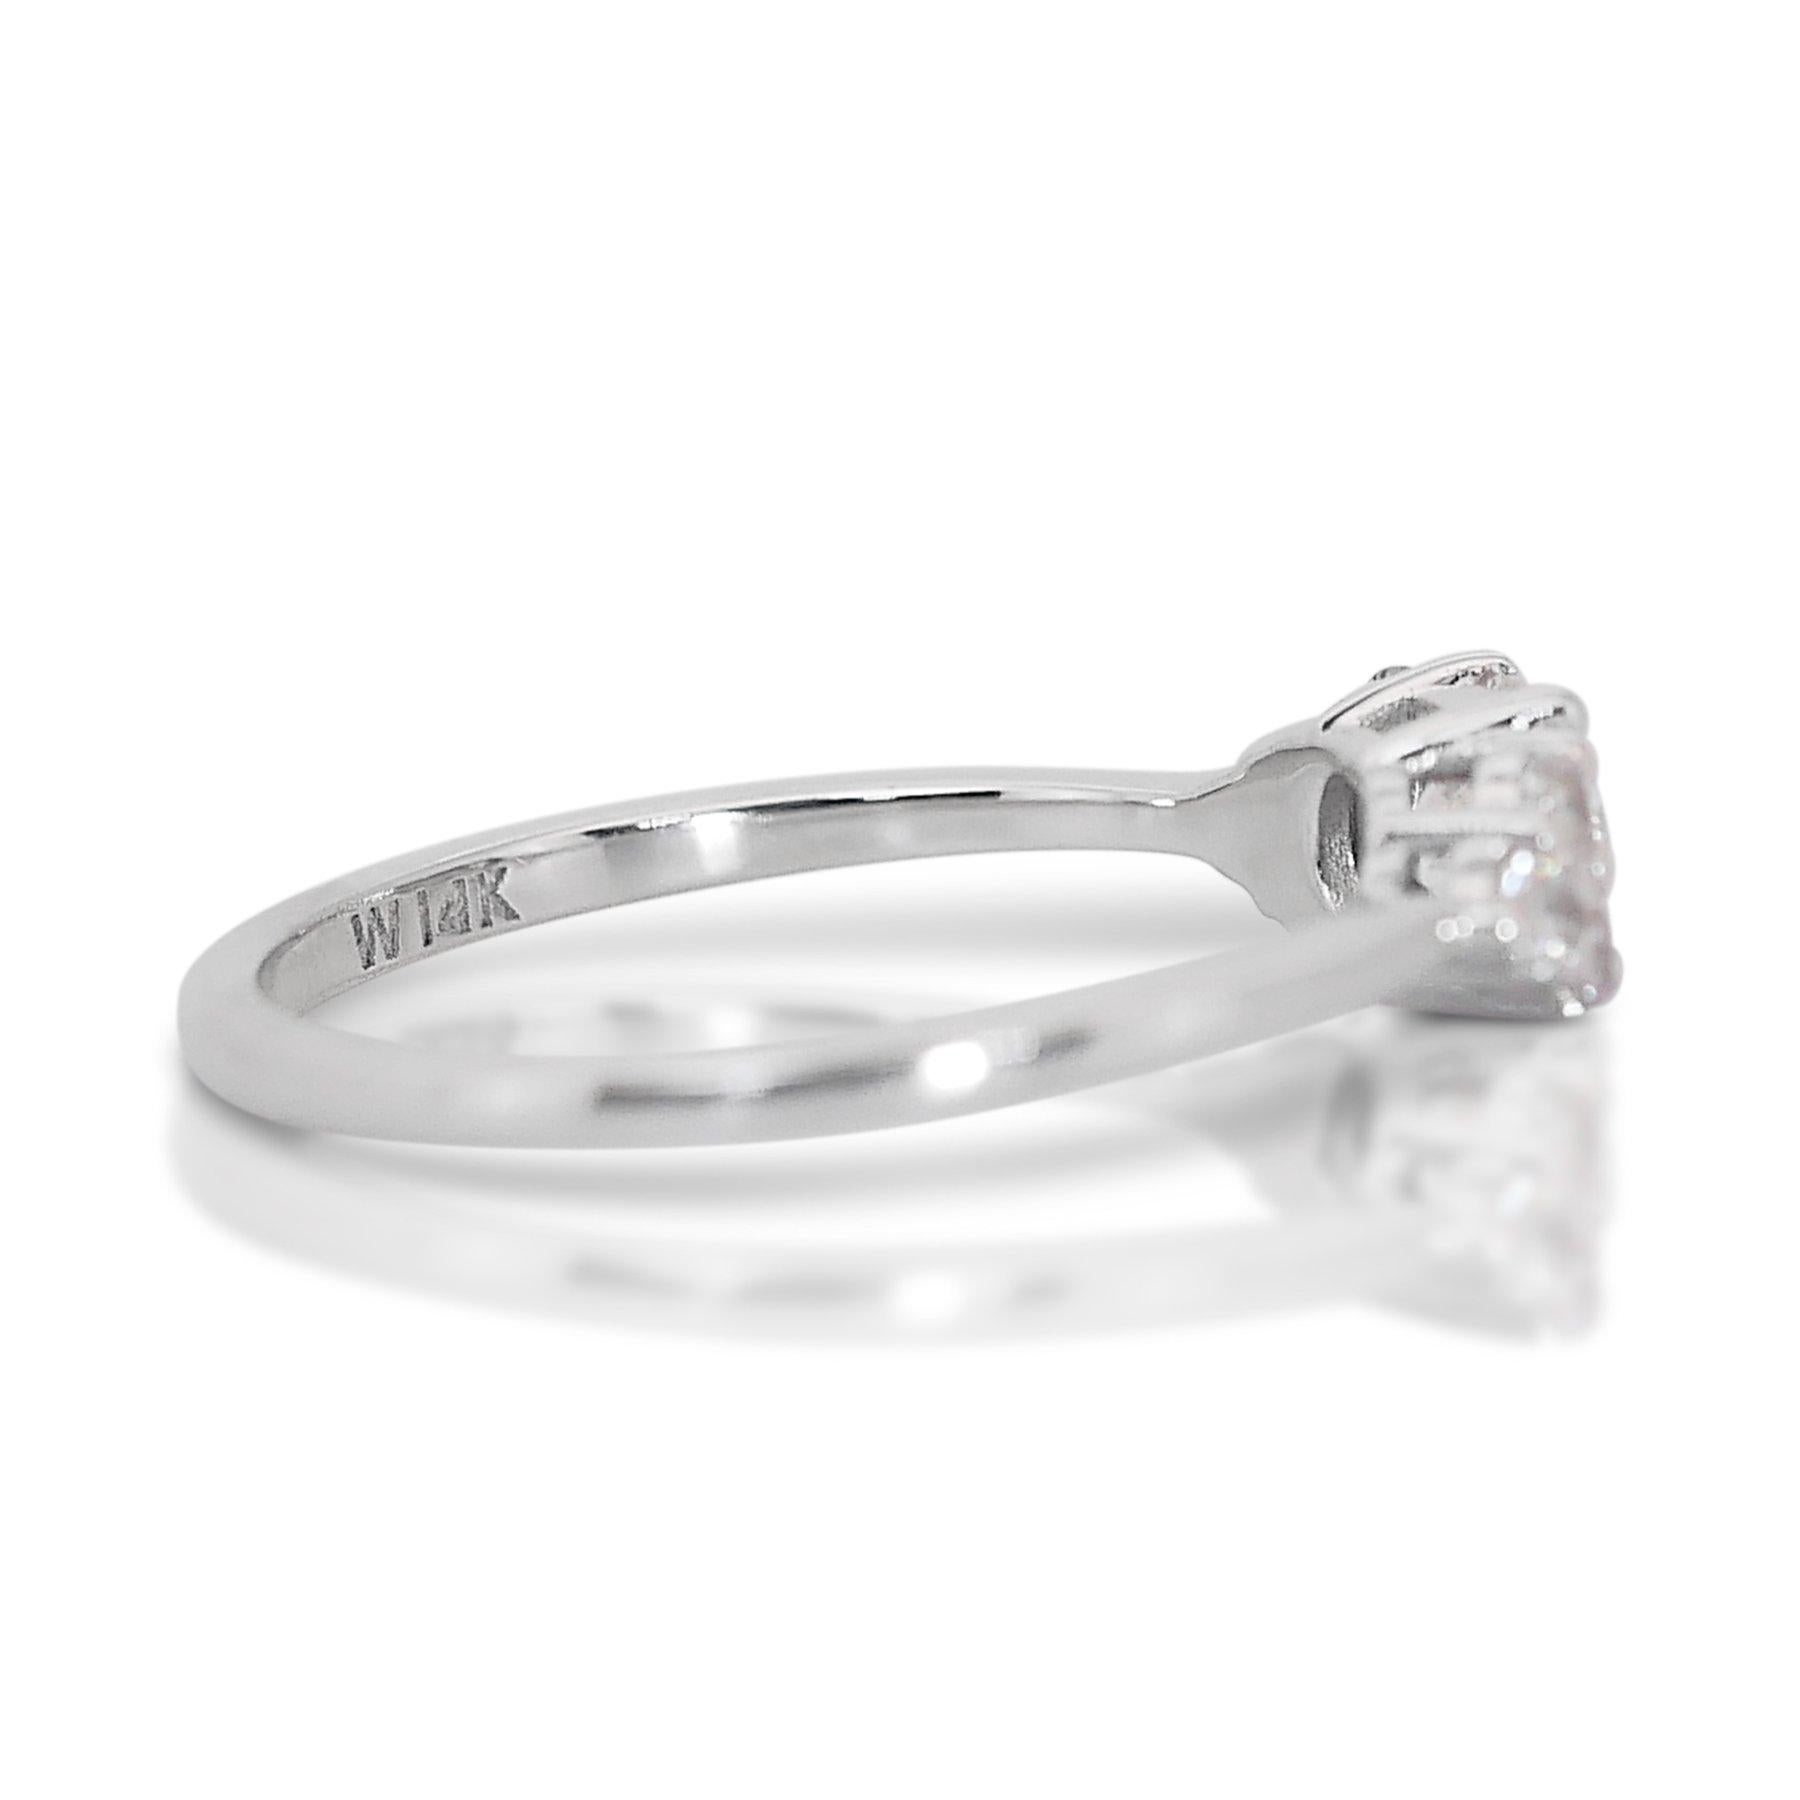 Round Cut Captivating 1.25ct Diamonds 7-Stone Ring in 18k White Gold - GIA Certified For Sale